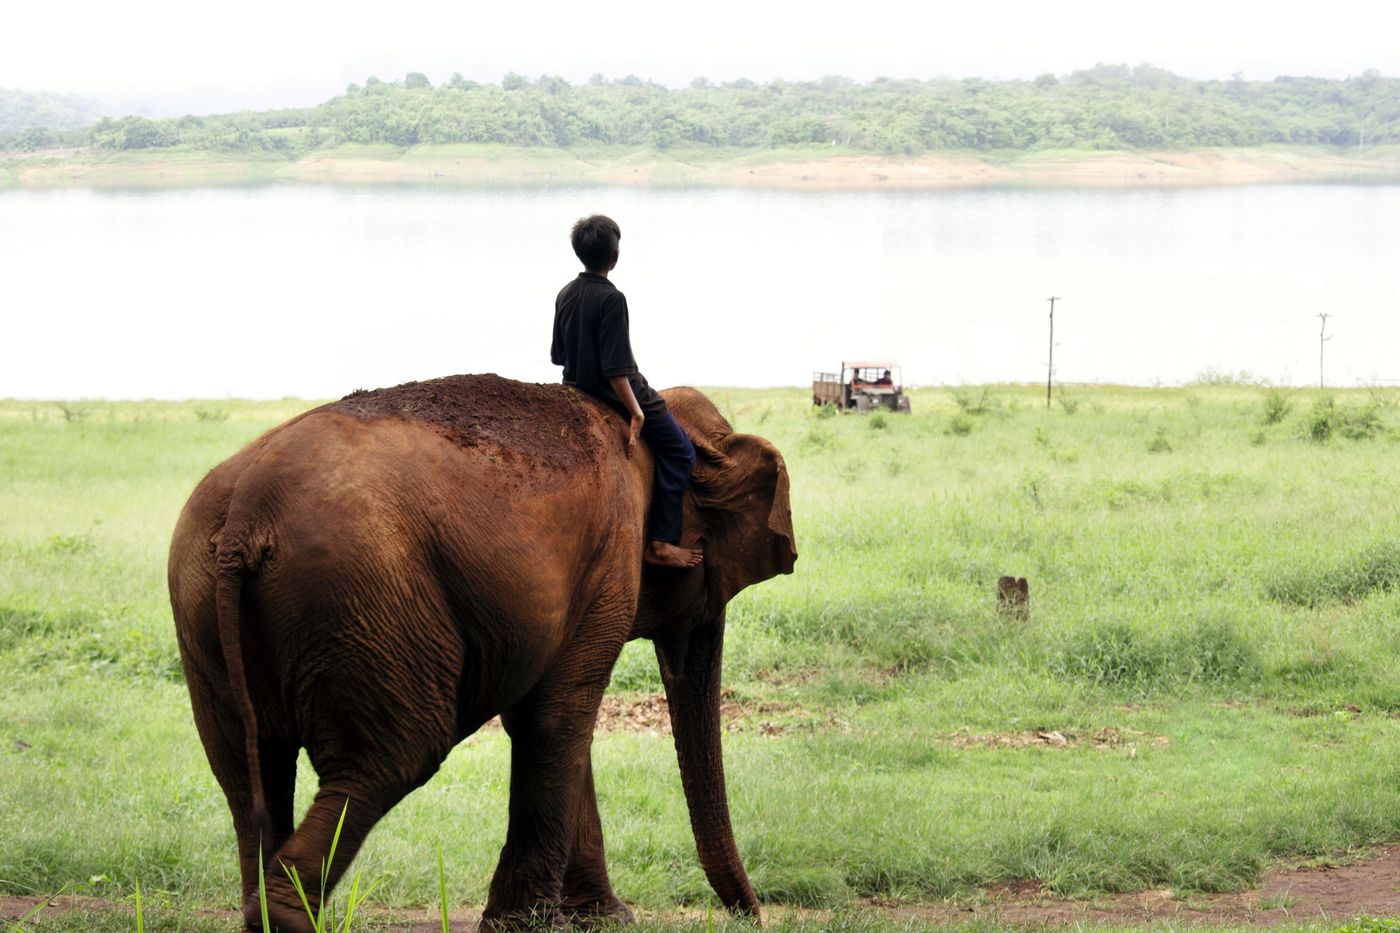 Walking with an elephant